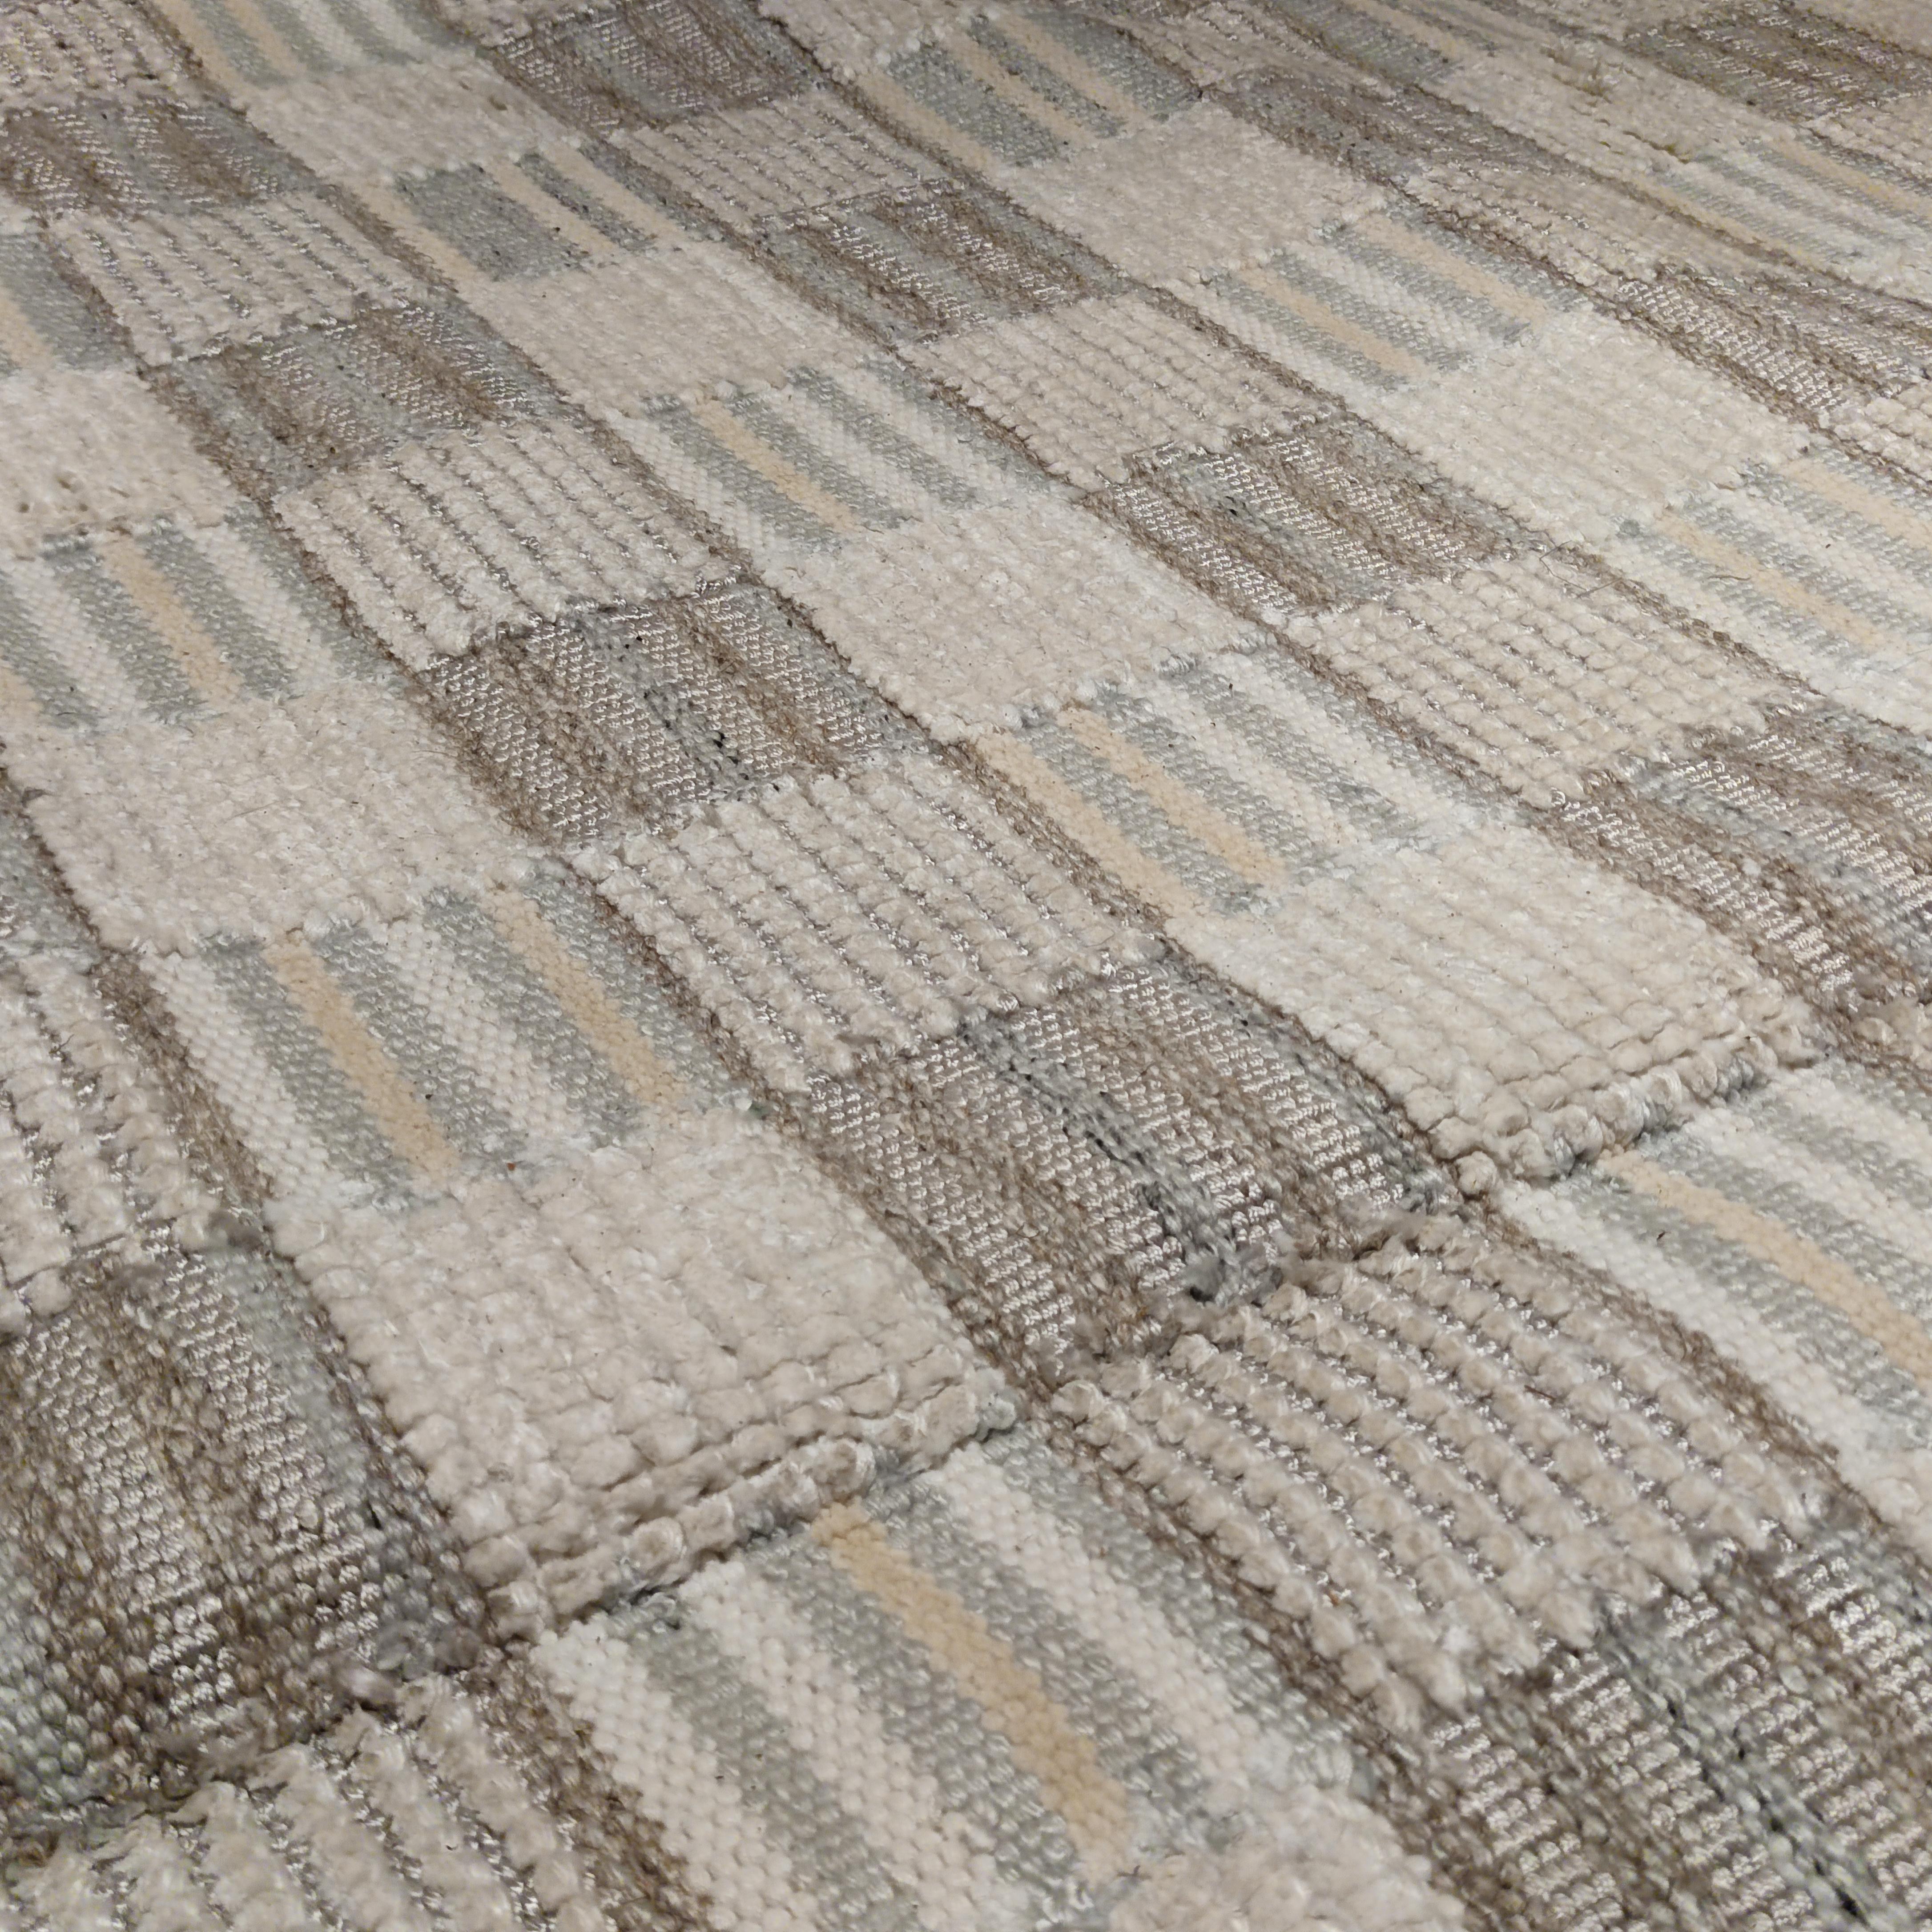 Inspired by Mid-Century Modern Swedish carpets, this kilim is part of our contemporary collection of textured flat weaves where the material is employed in such a way as to create a sturdy rug that can be beautifully juxtaposed in today's interiors.